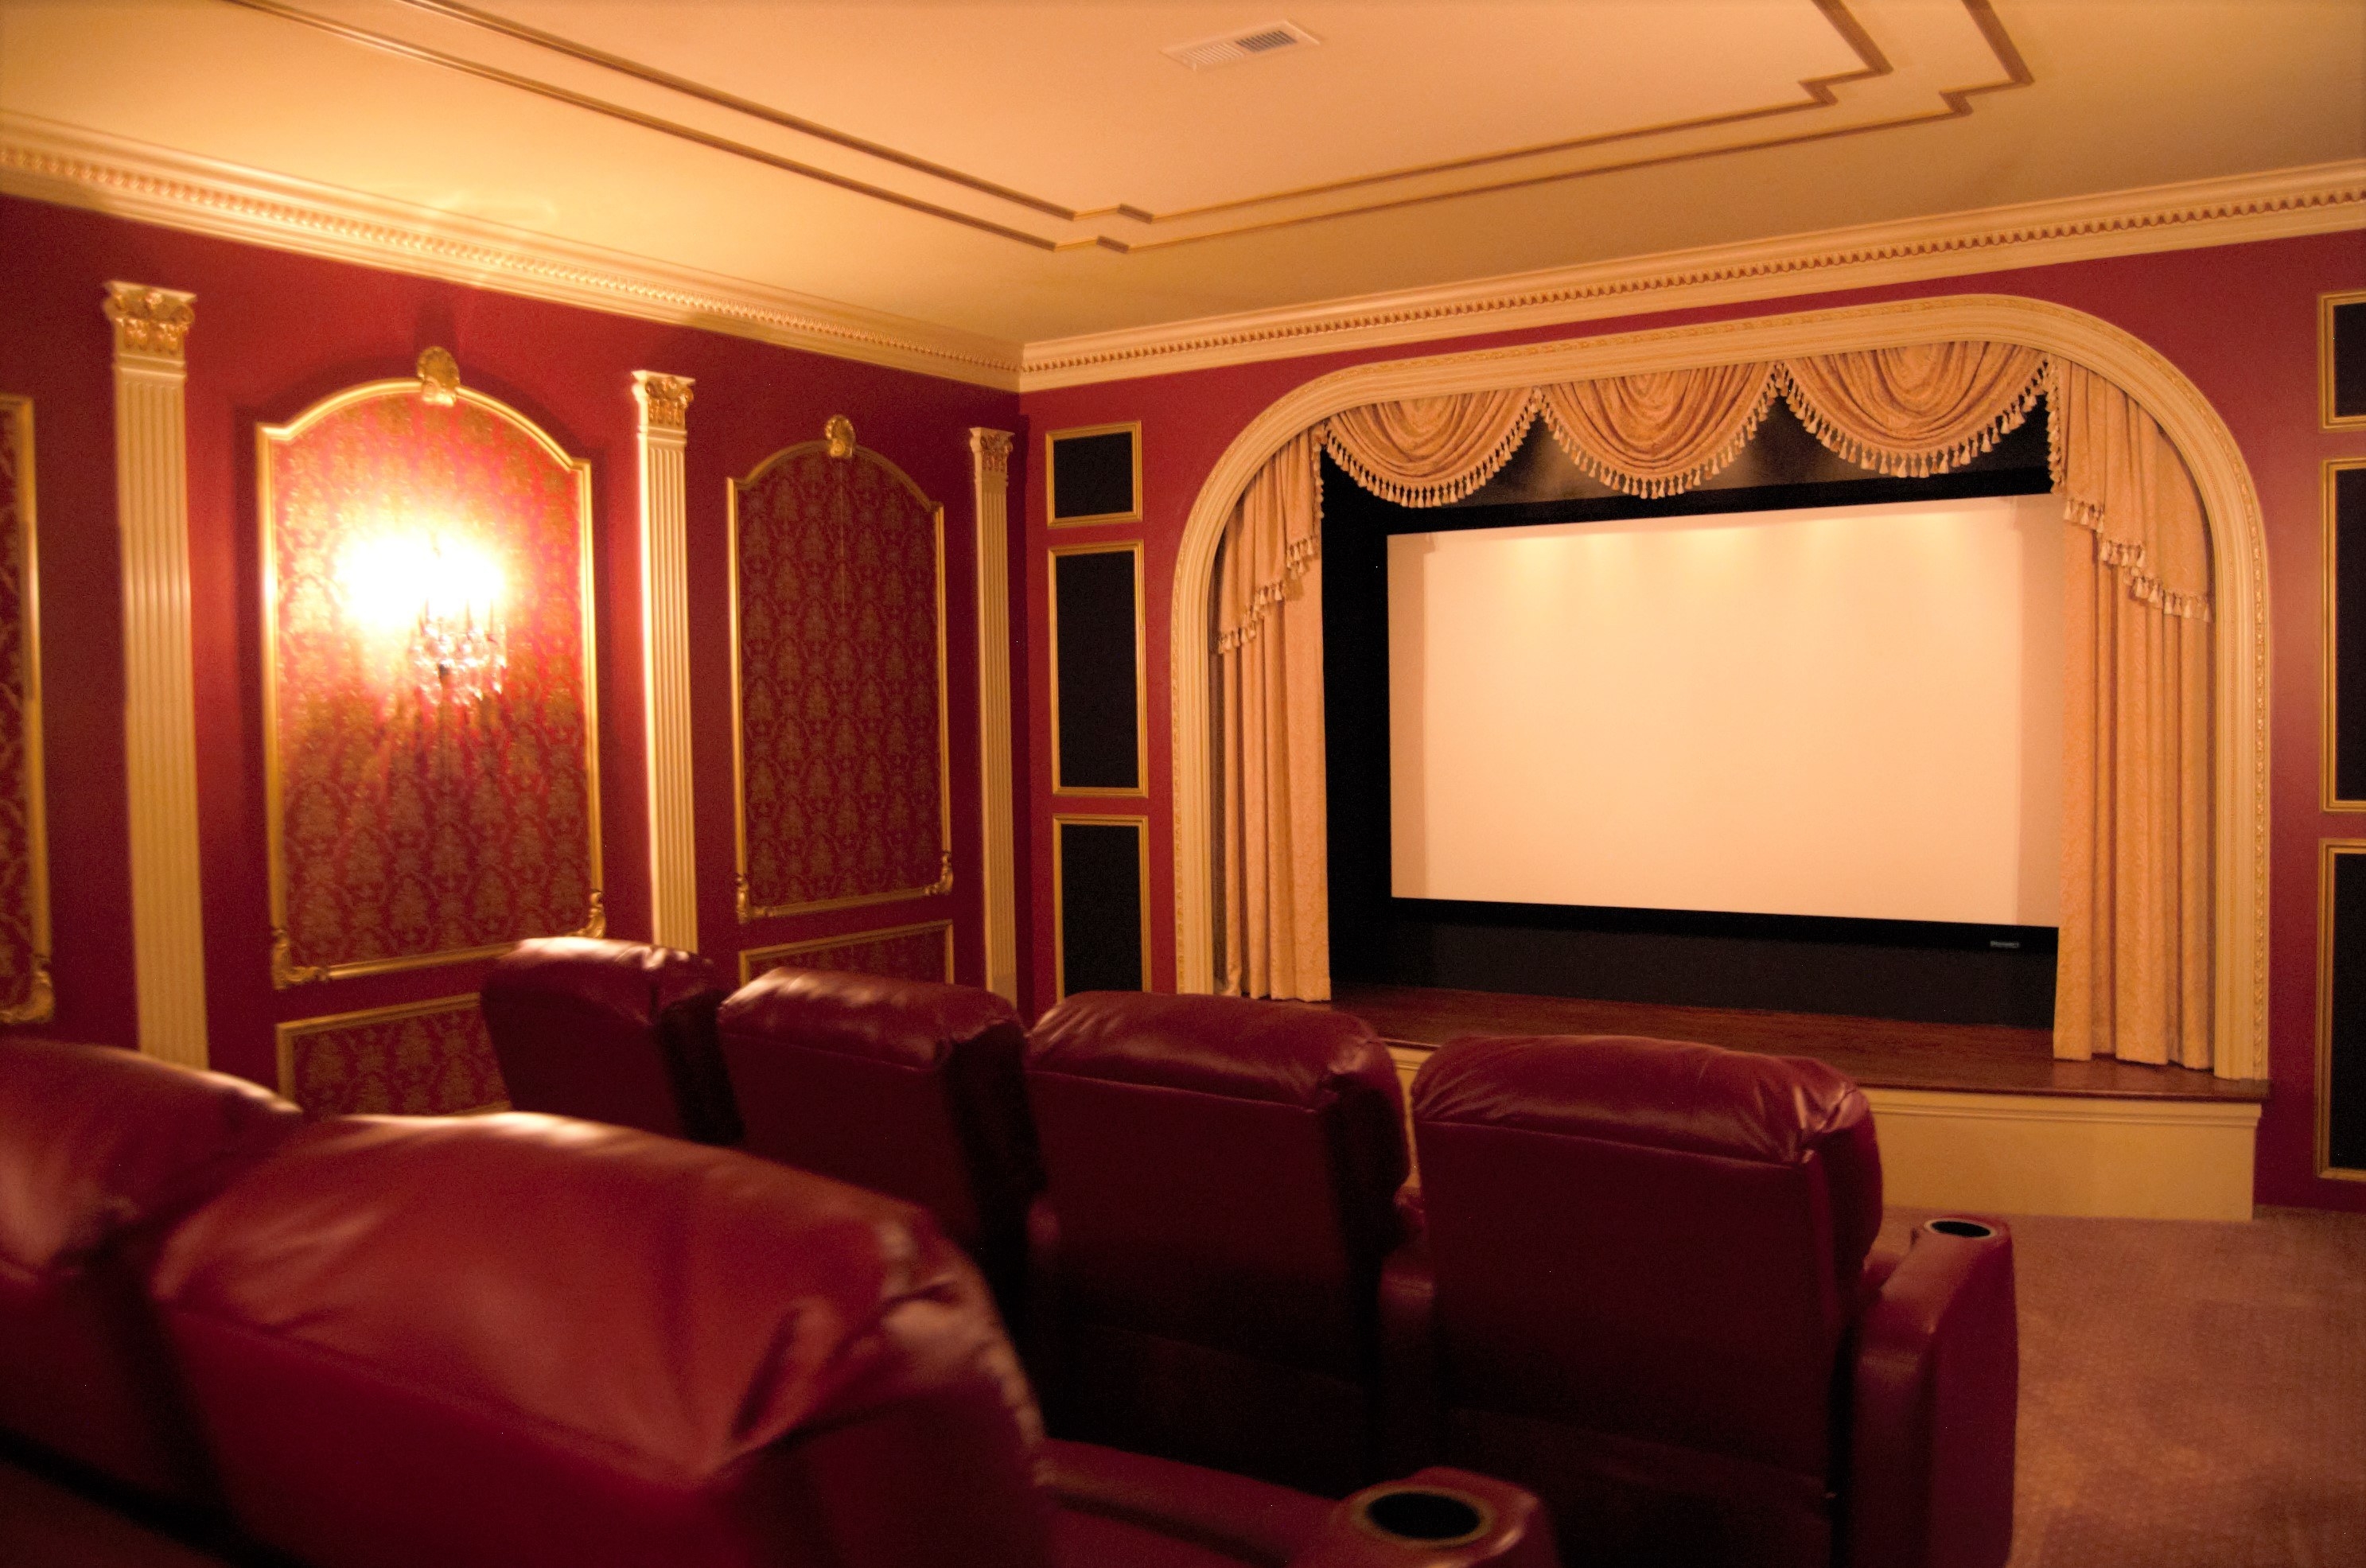 Red home theater with large red reclining chairs and a gold curtain around the projector screen